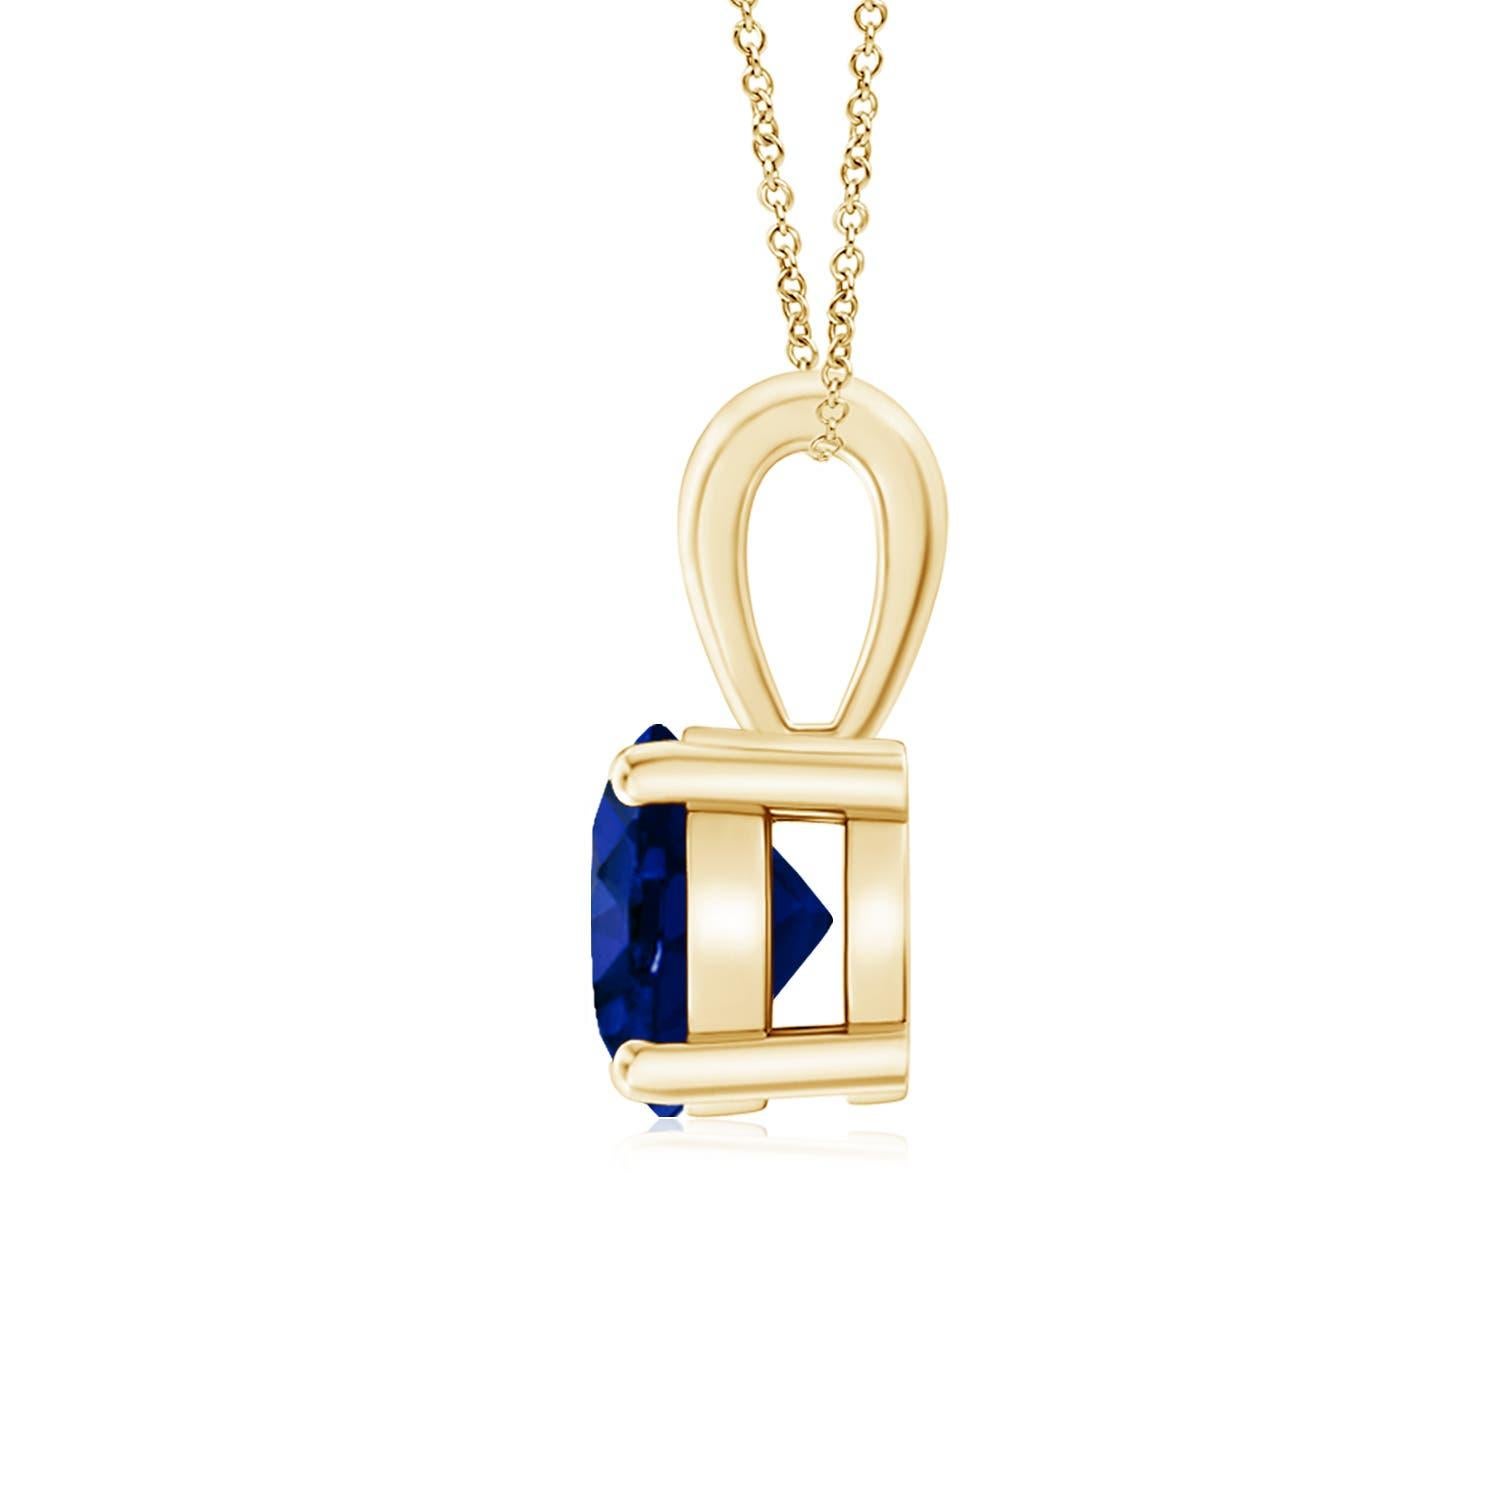 Drawing attention with its gorgeous hue and remarkable sheen is a GIA certified blue sapphire. The round sapphire is linked to a gleaming metal bale. Crafted in 18k yellow gold, this prong-set sapphire solitaire pendant is simply alluring.

